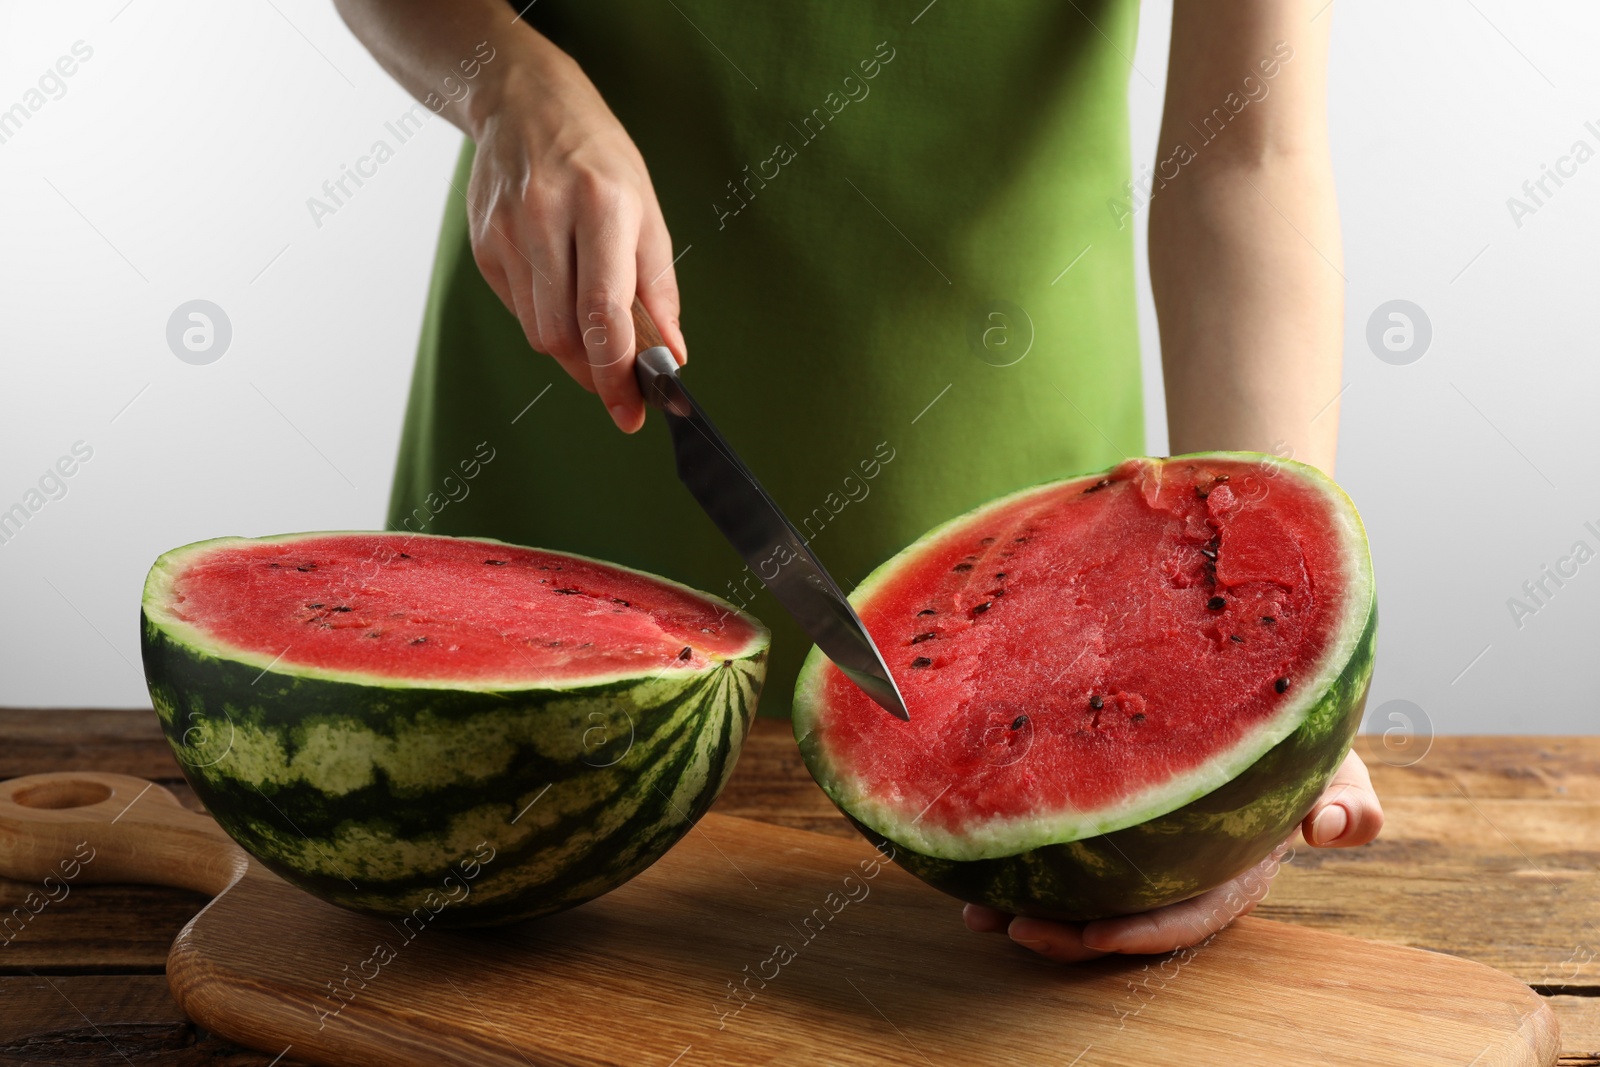 Photo of Woman cutting delicious watermelon at wooden table against light background, closeup